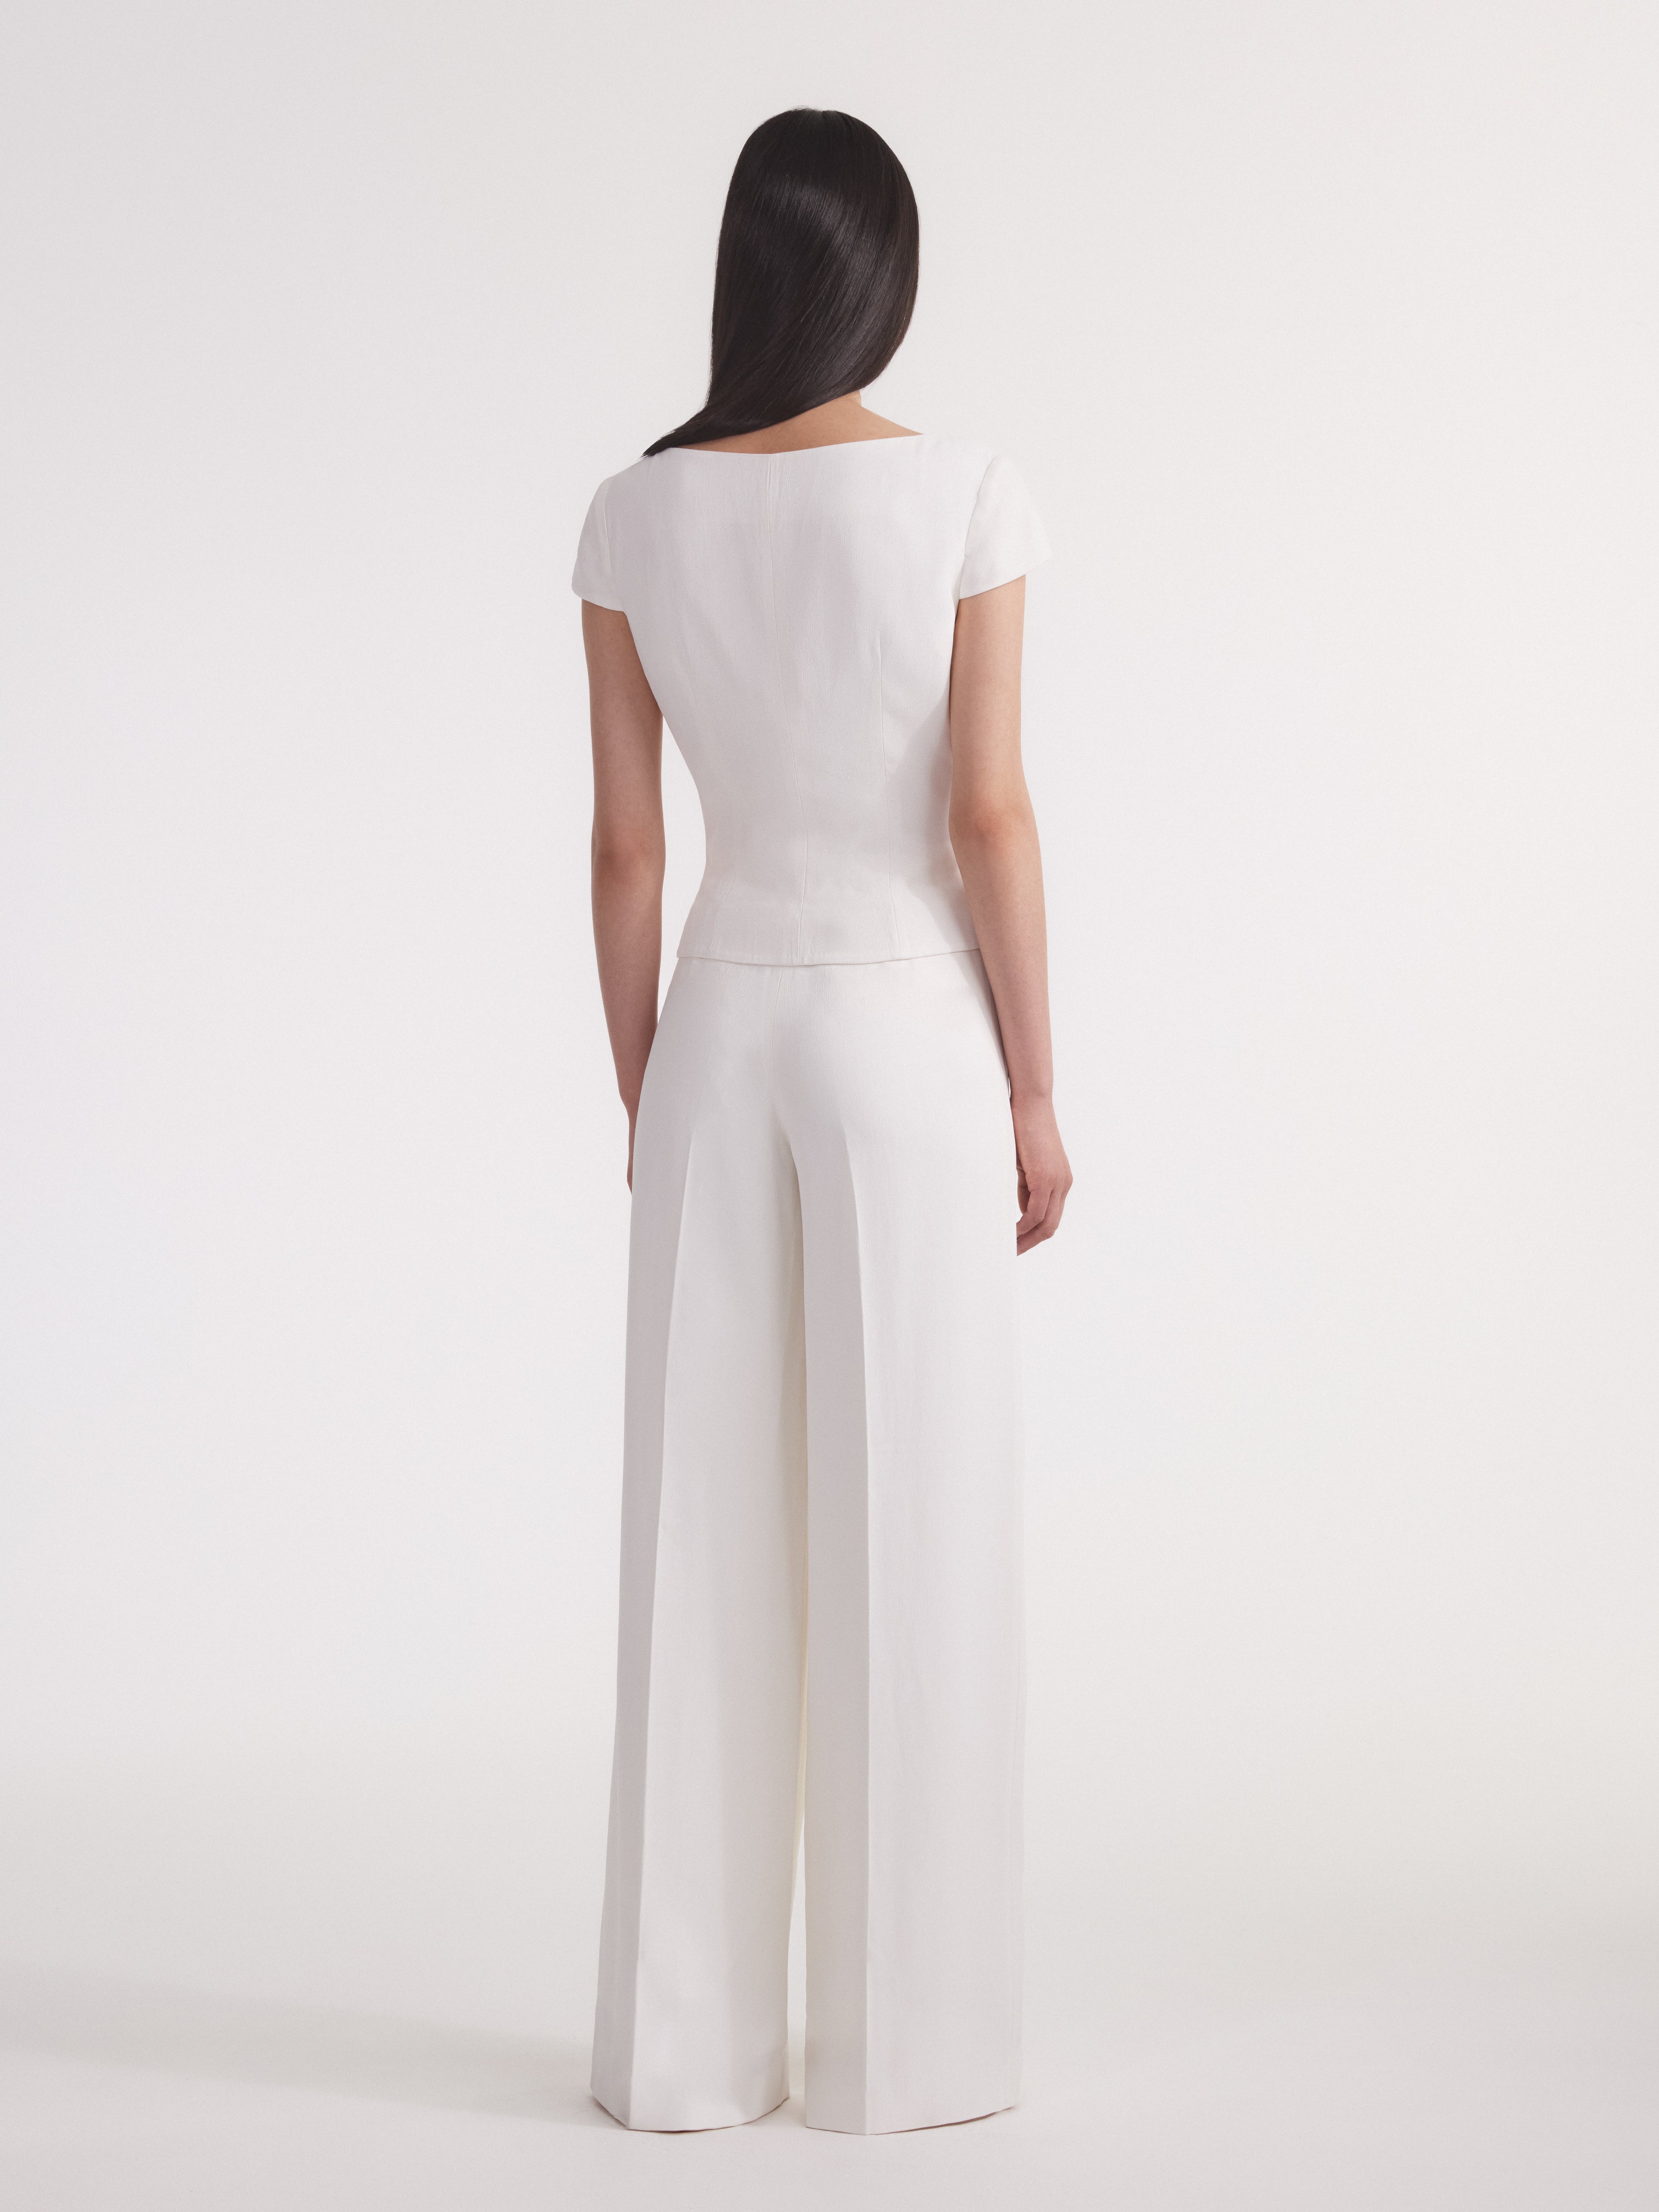 Wide Tailored Trouser in Ivory